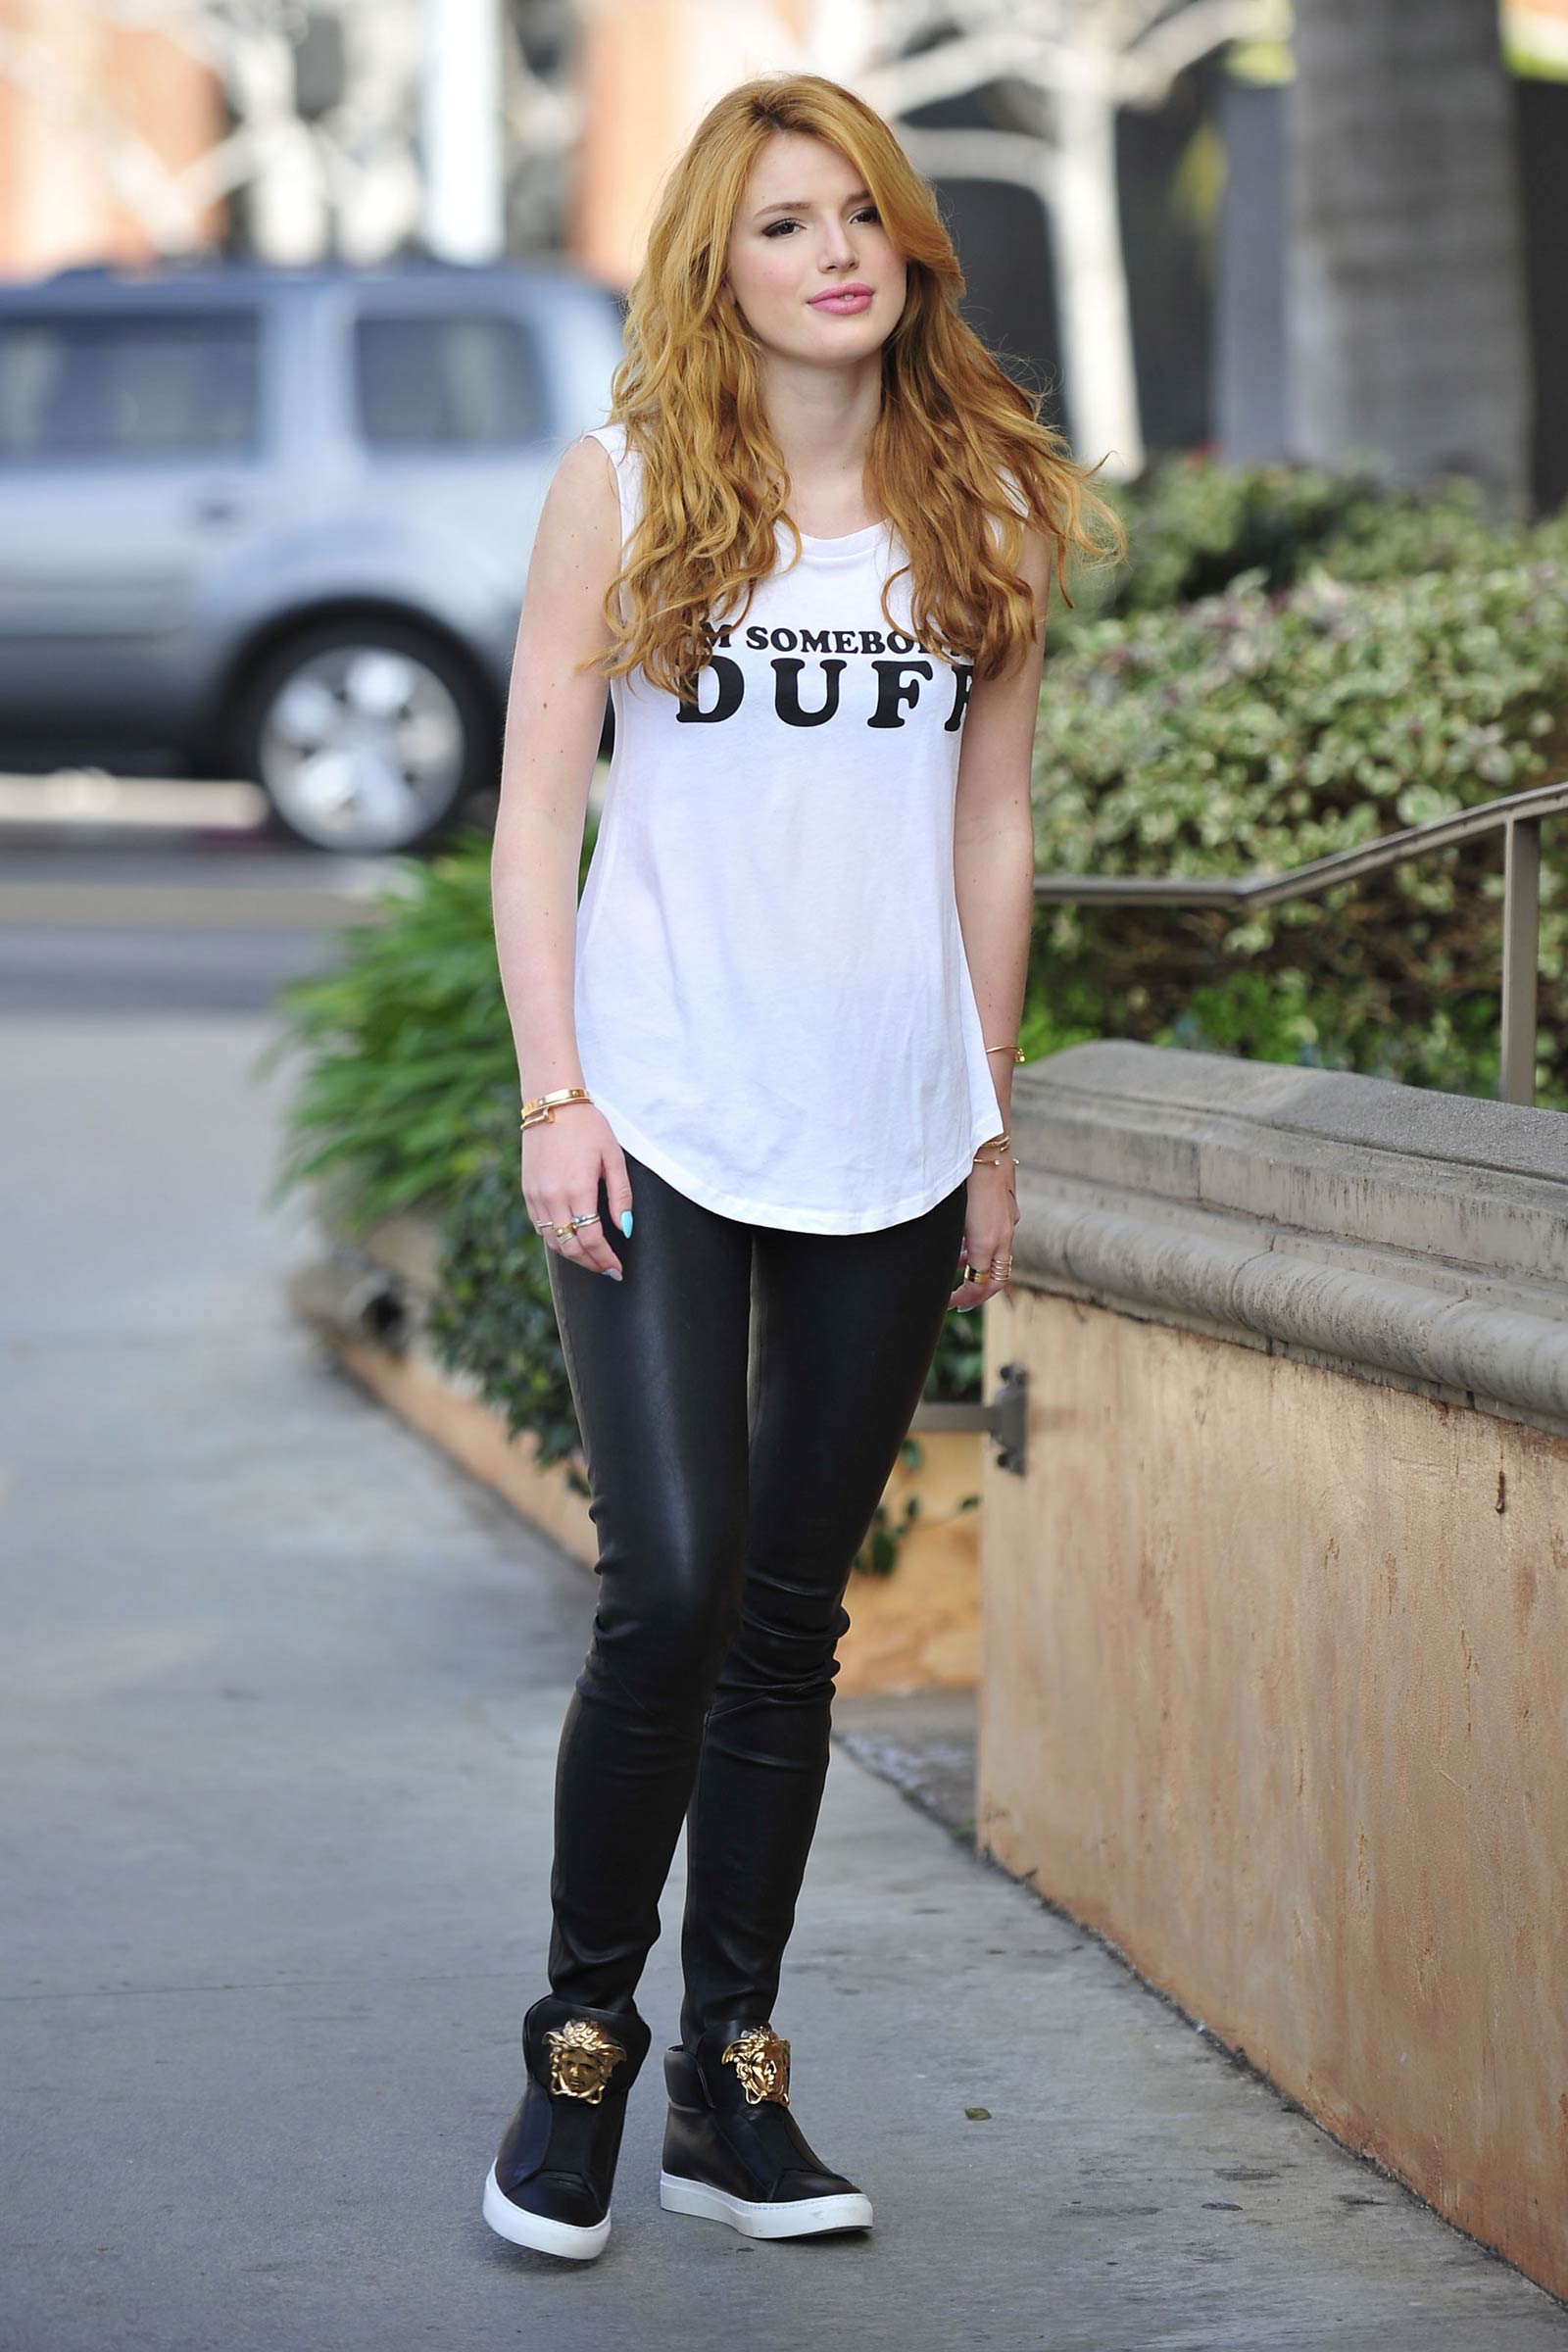 Bella Thorne leaving a Press Day Event for The Duff